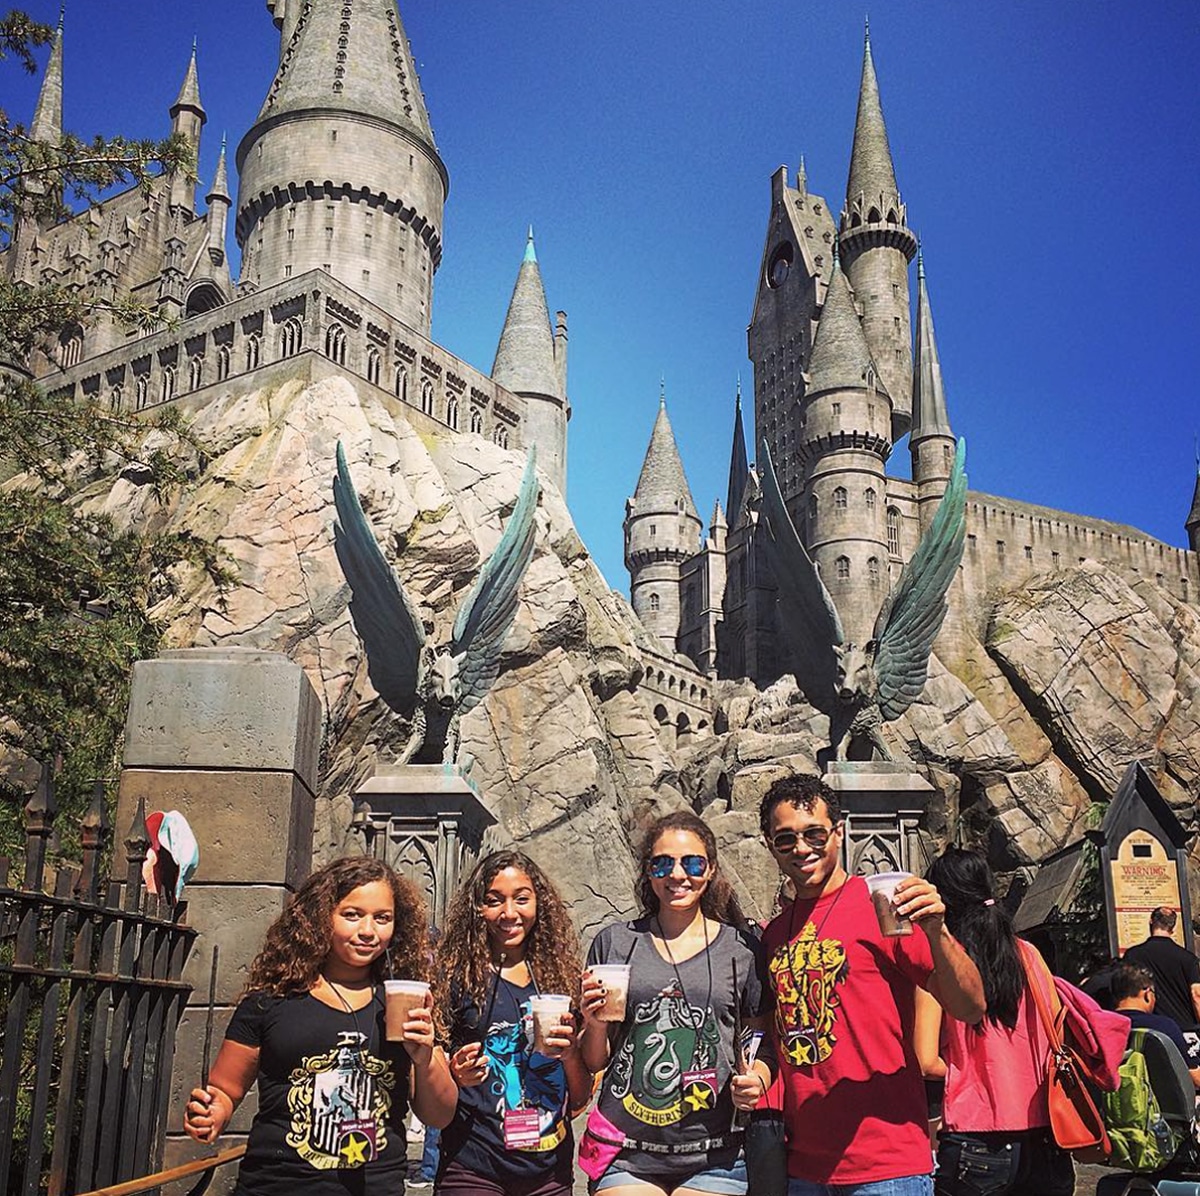 The Wizarding World of Harry Potter, Hollywood